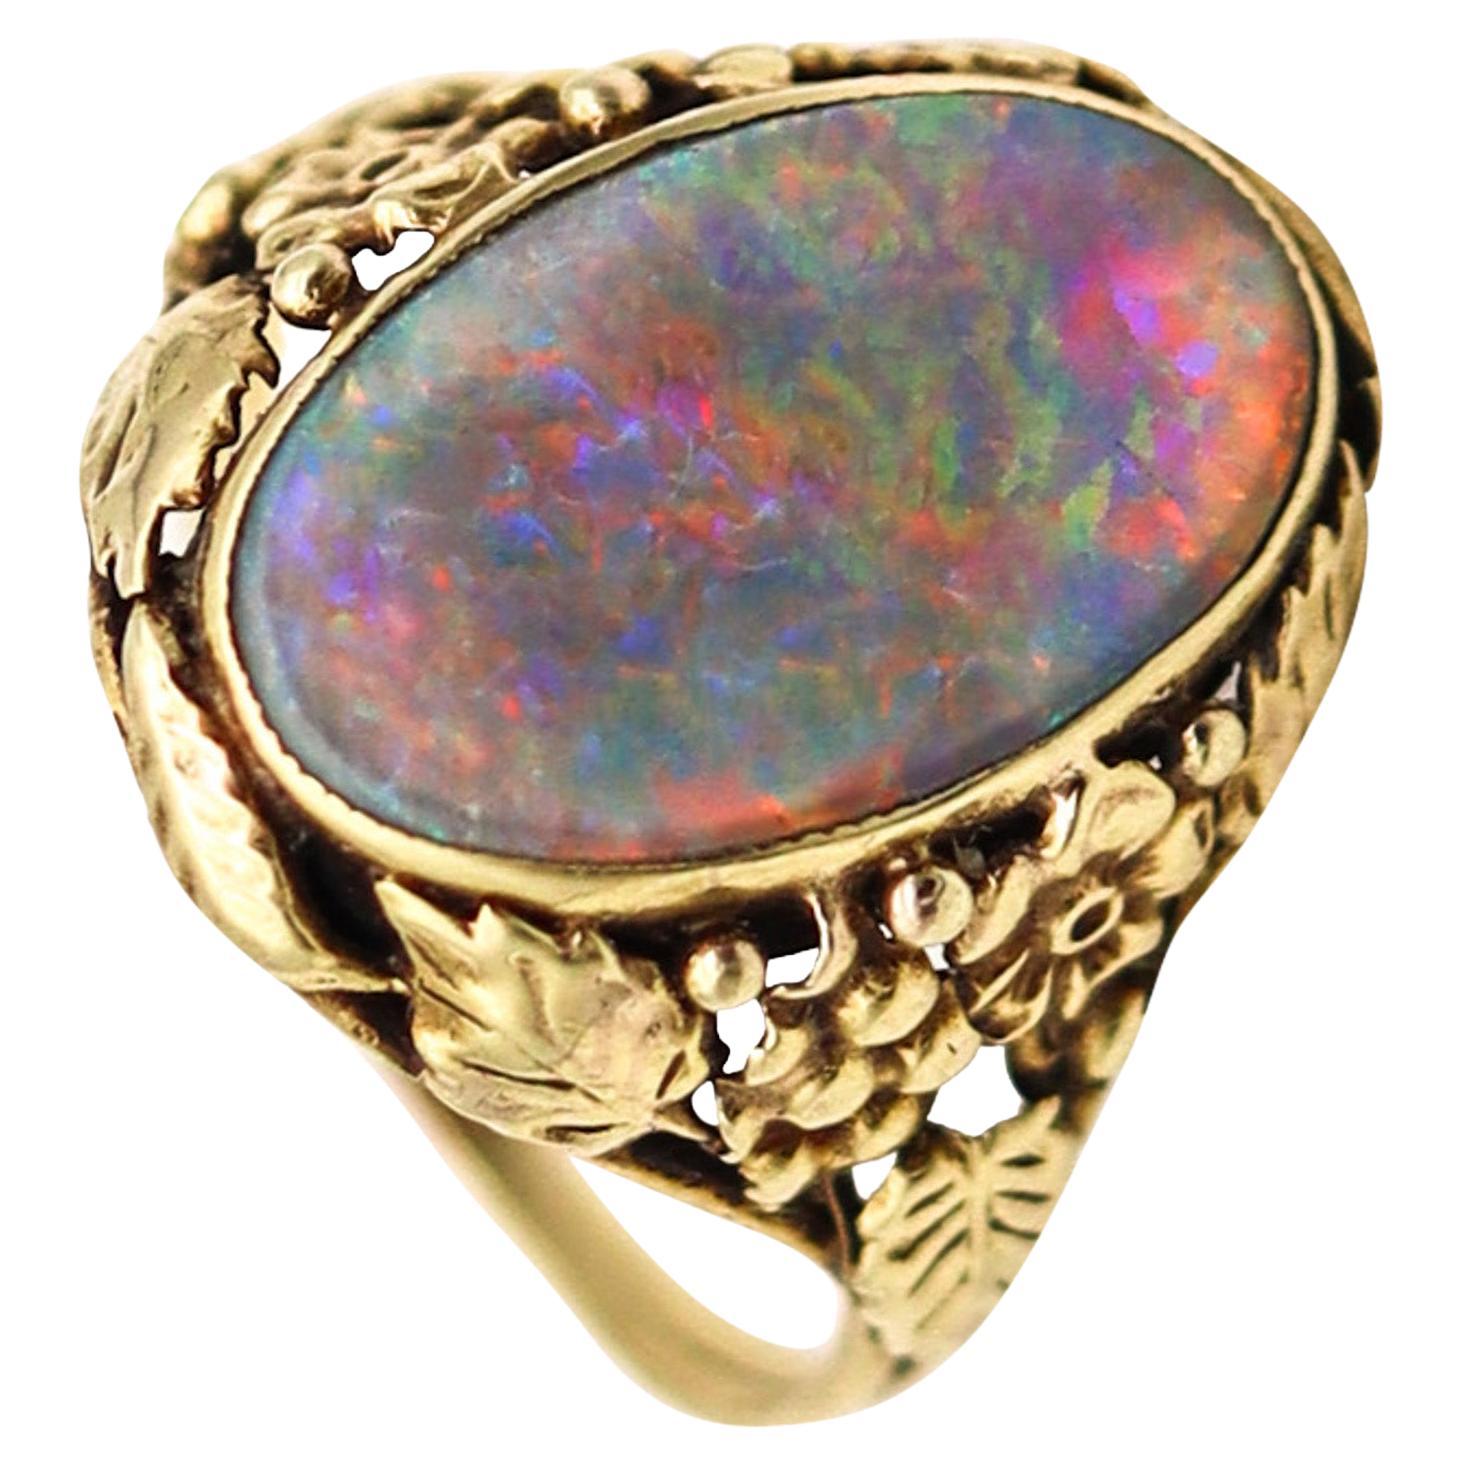 American 1895 Art Nouveau Ring In 14Kt Yellow Gold With 3.42 Cts Black Opal